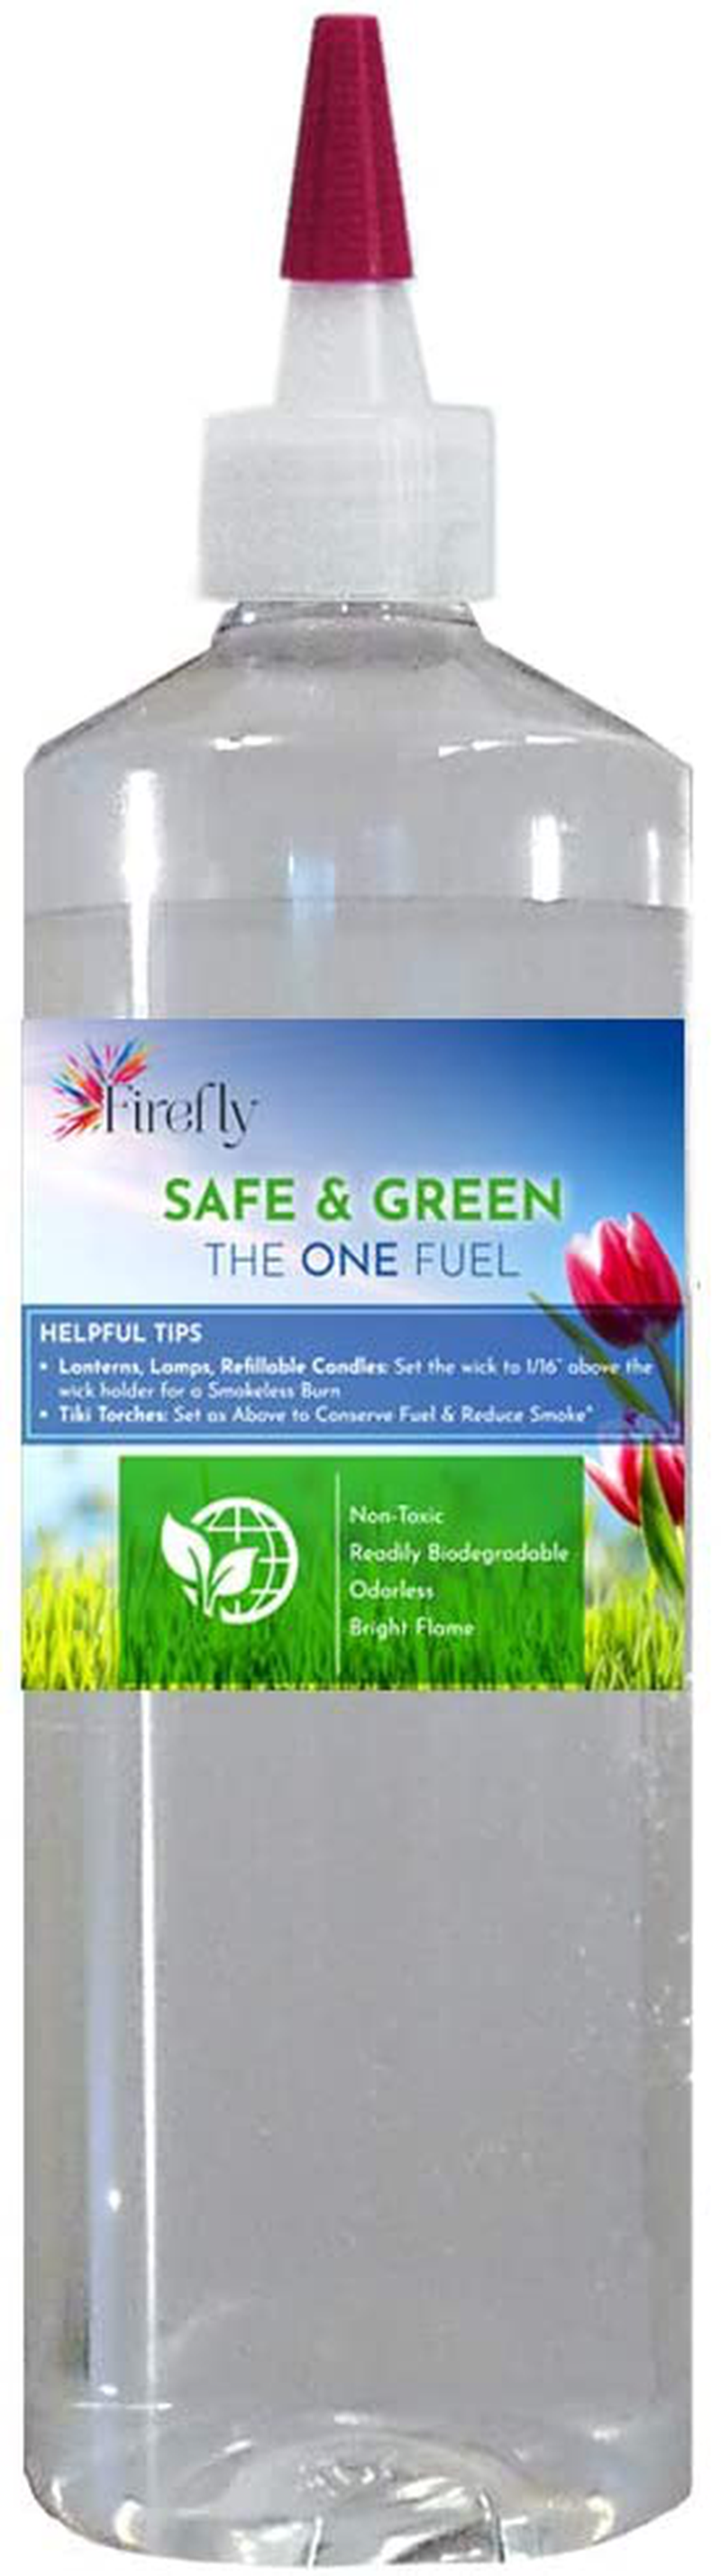 Firefly Kosher Safe and Green Eco-Friendly Lamp Oil - Non Toxic - Biodegradable - Virtually Odorless - Paraffin Alternative - Indoor Outdoor Use - Lamps, Lanterns, Candles, Patio Tiki Torches - 16 Oz